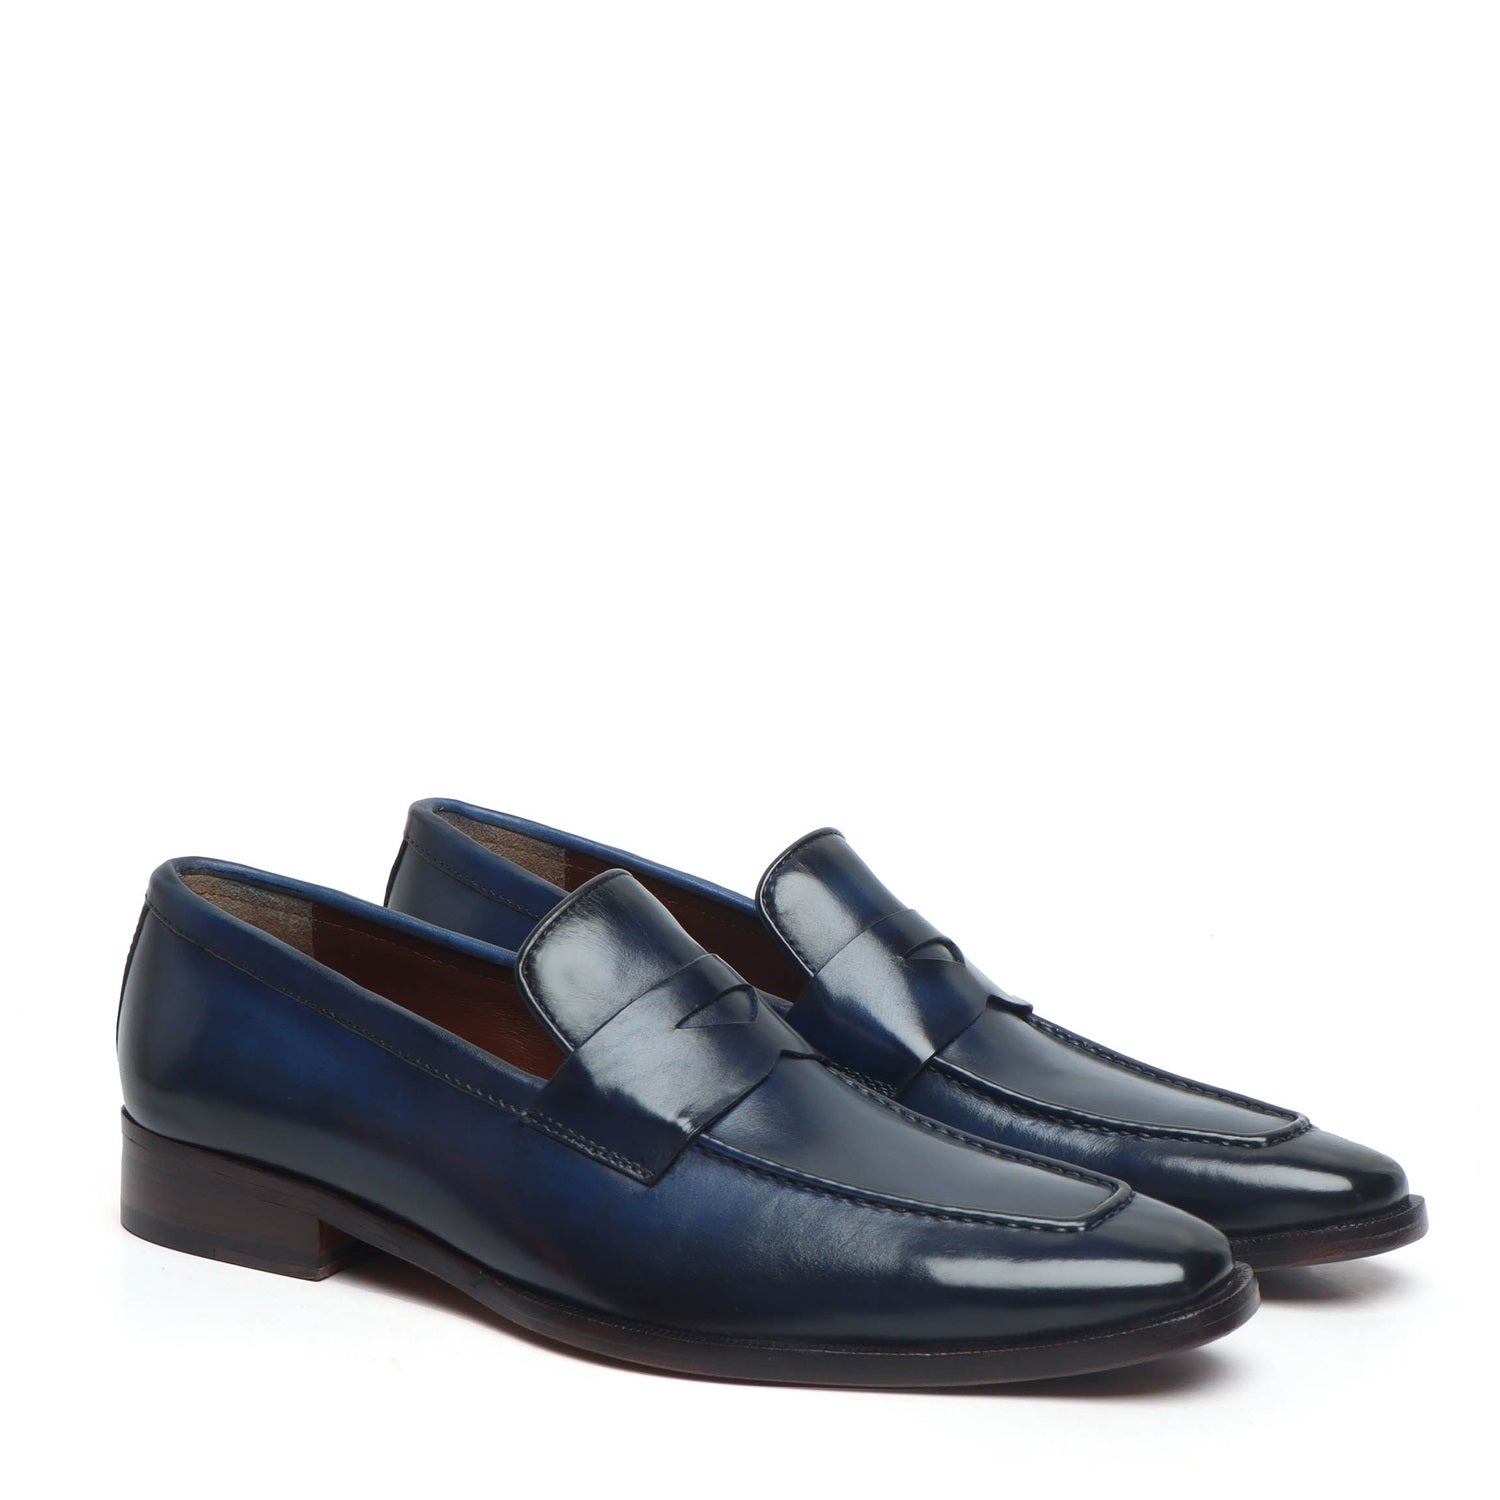 Blue Leather Penny Loafers with Triangular Cut-Strap By BRUNE & BARESKIN